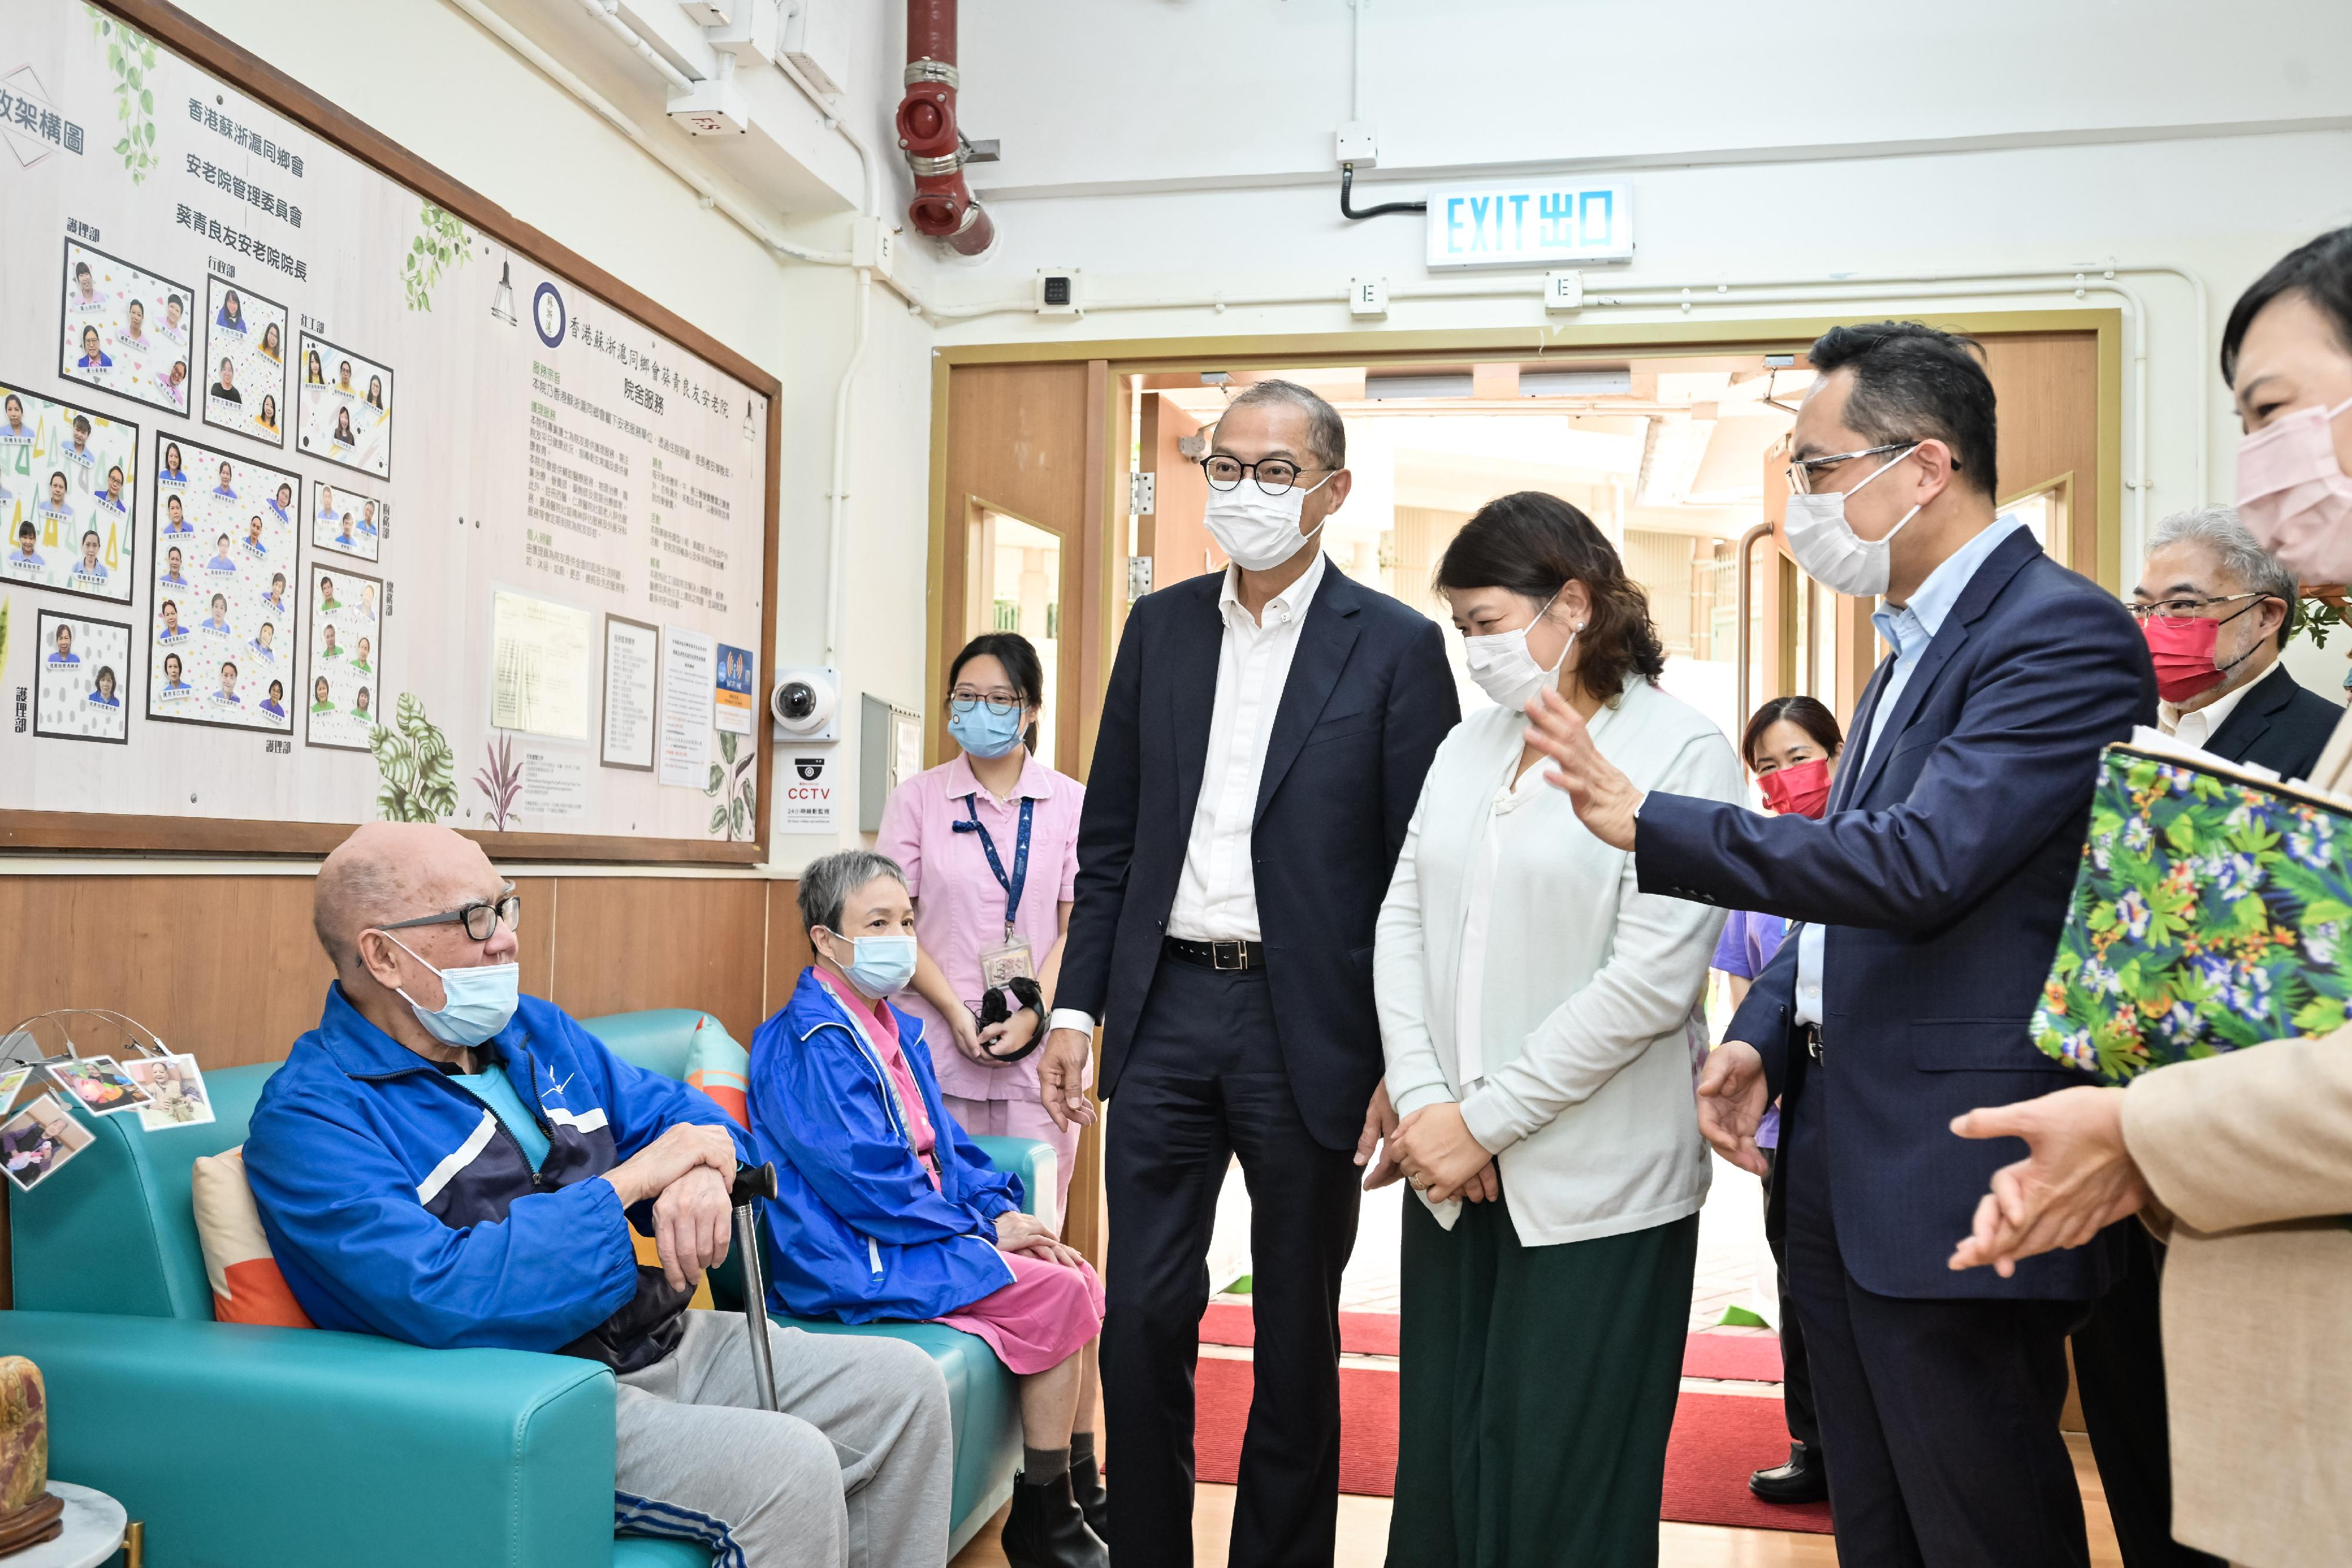 The Secretary for Health, Professor Lo Chung-mau, visited a residential care home for the elderly (RCHE) in Kwai Tsing District this afternoon (November 3) to get a better grasp of the basic dental care services provided to residents of RCHEs by outreach dental teams. Photo shows Professor Lo (fourth left); the Under Secretary for Health, Dr Libby Lee (fifth left); and the Director of Health, Dr Ronald Lam (third right), chatting with residents of the RCHE to listen to their views on the services.